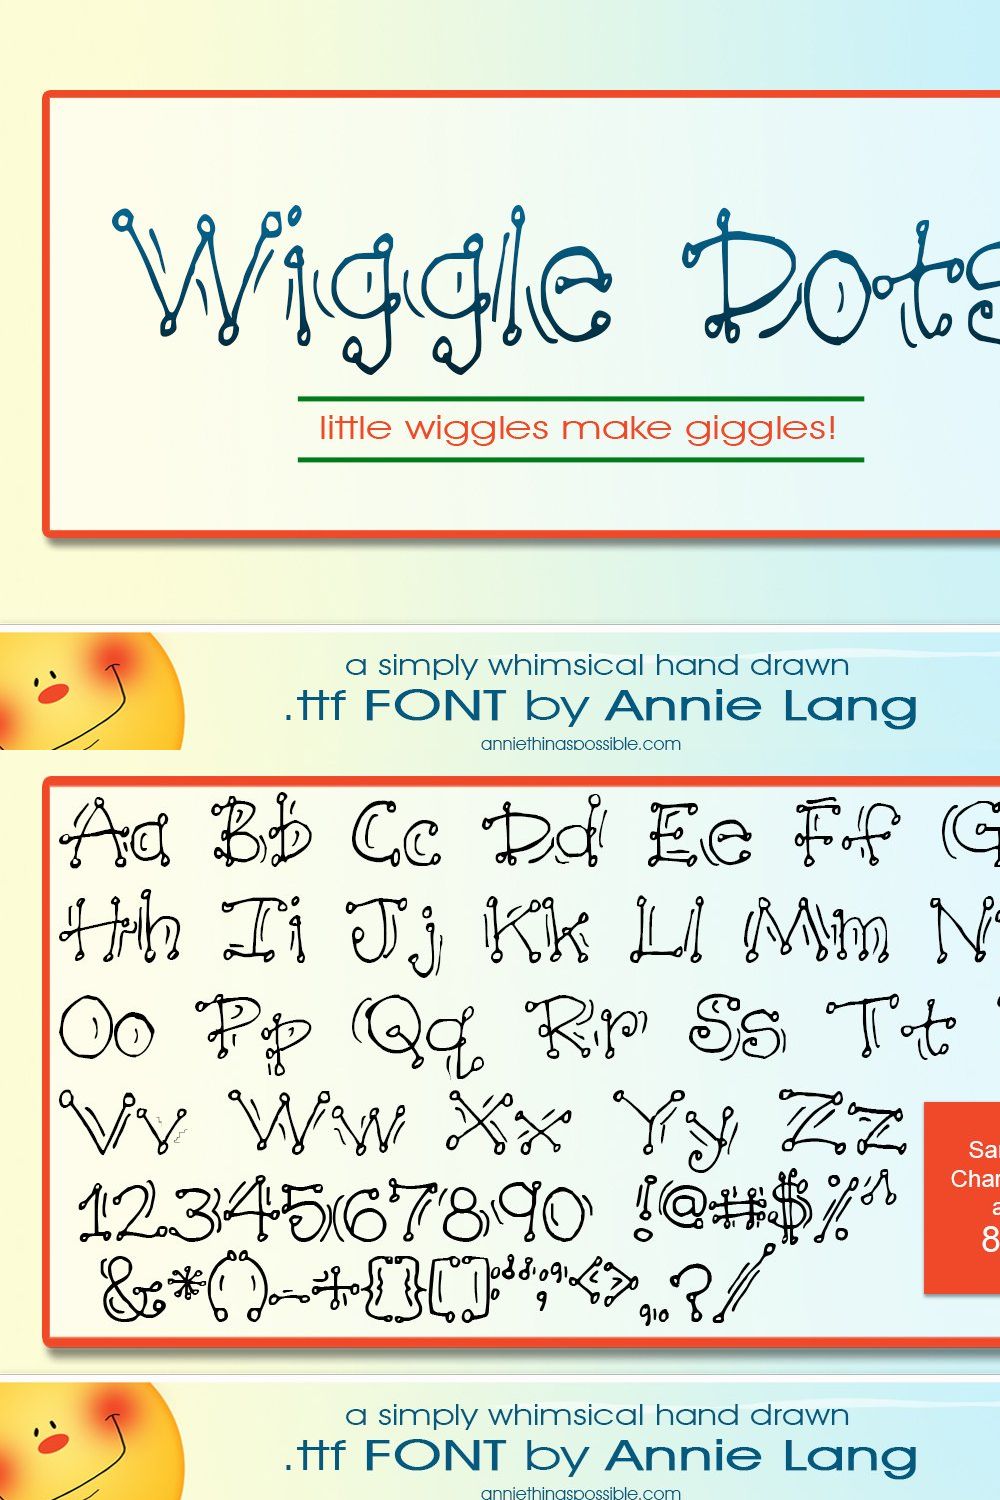 Annie's Wiggle Dots Font pinterest preview image.